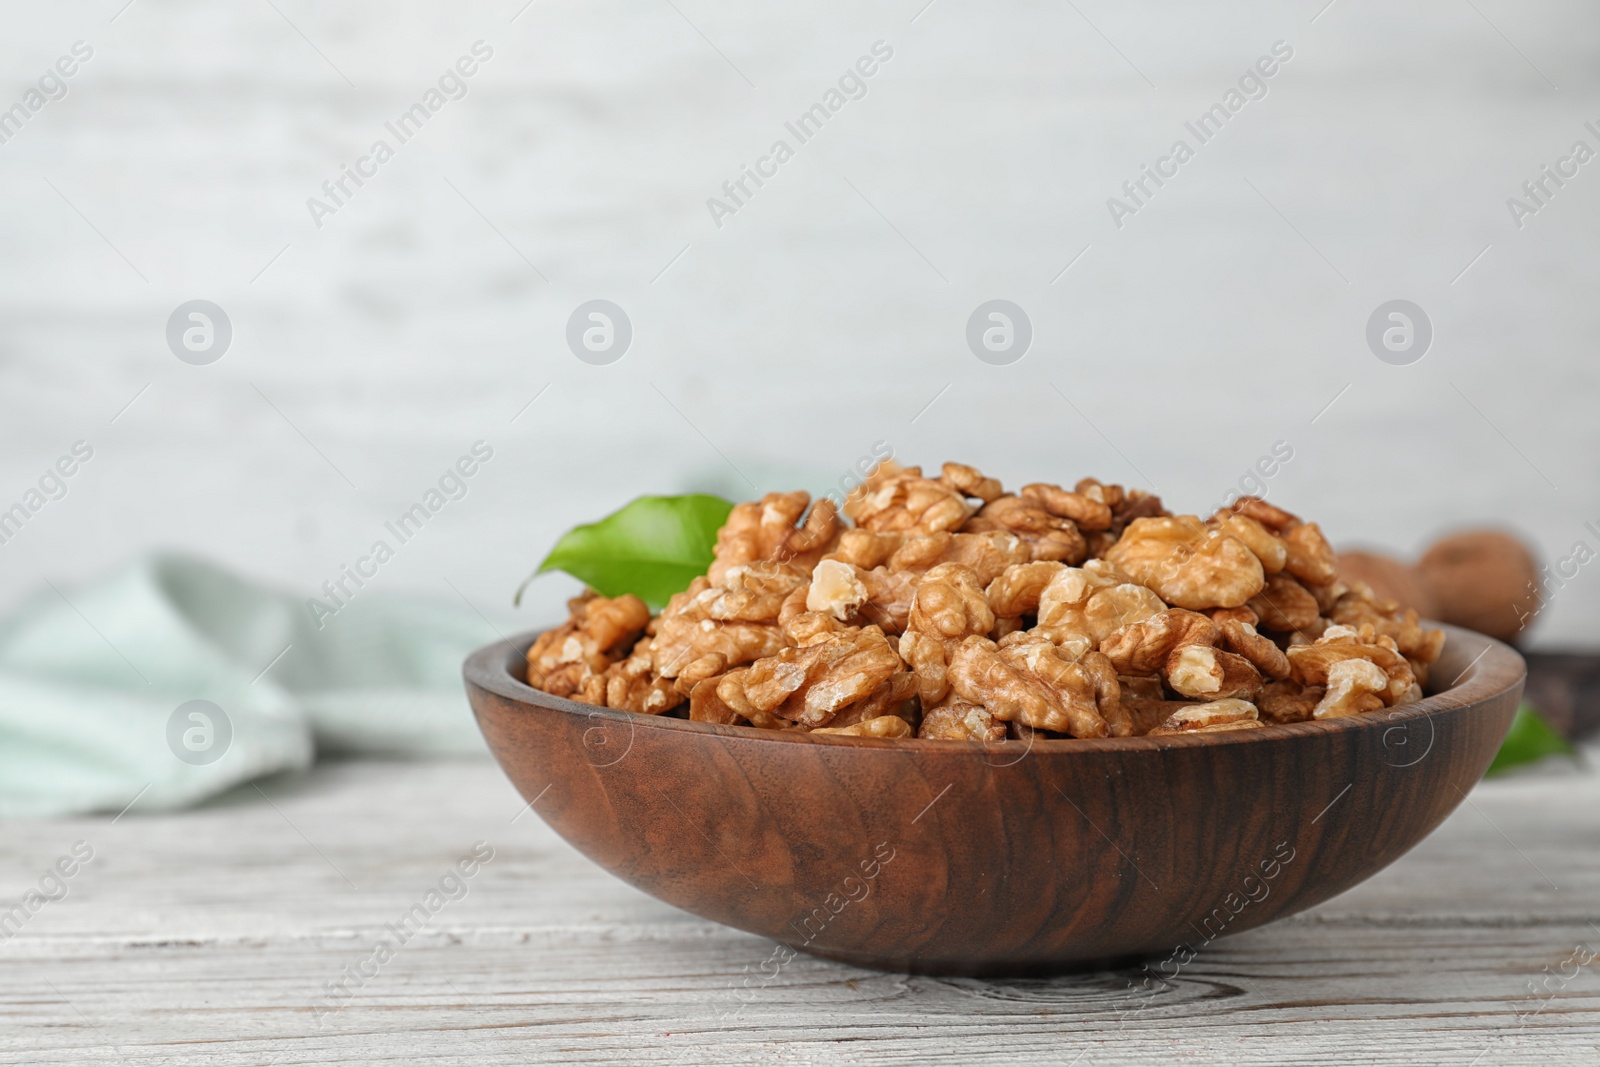 Photo of Plate with tasty walnuts on wooden table